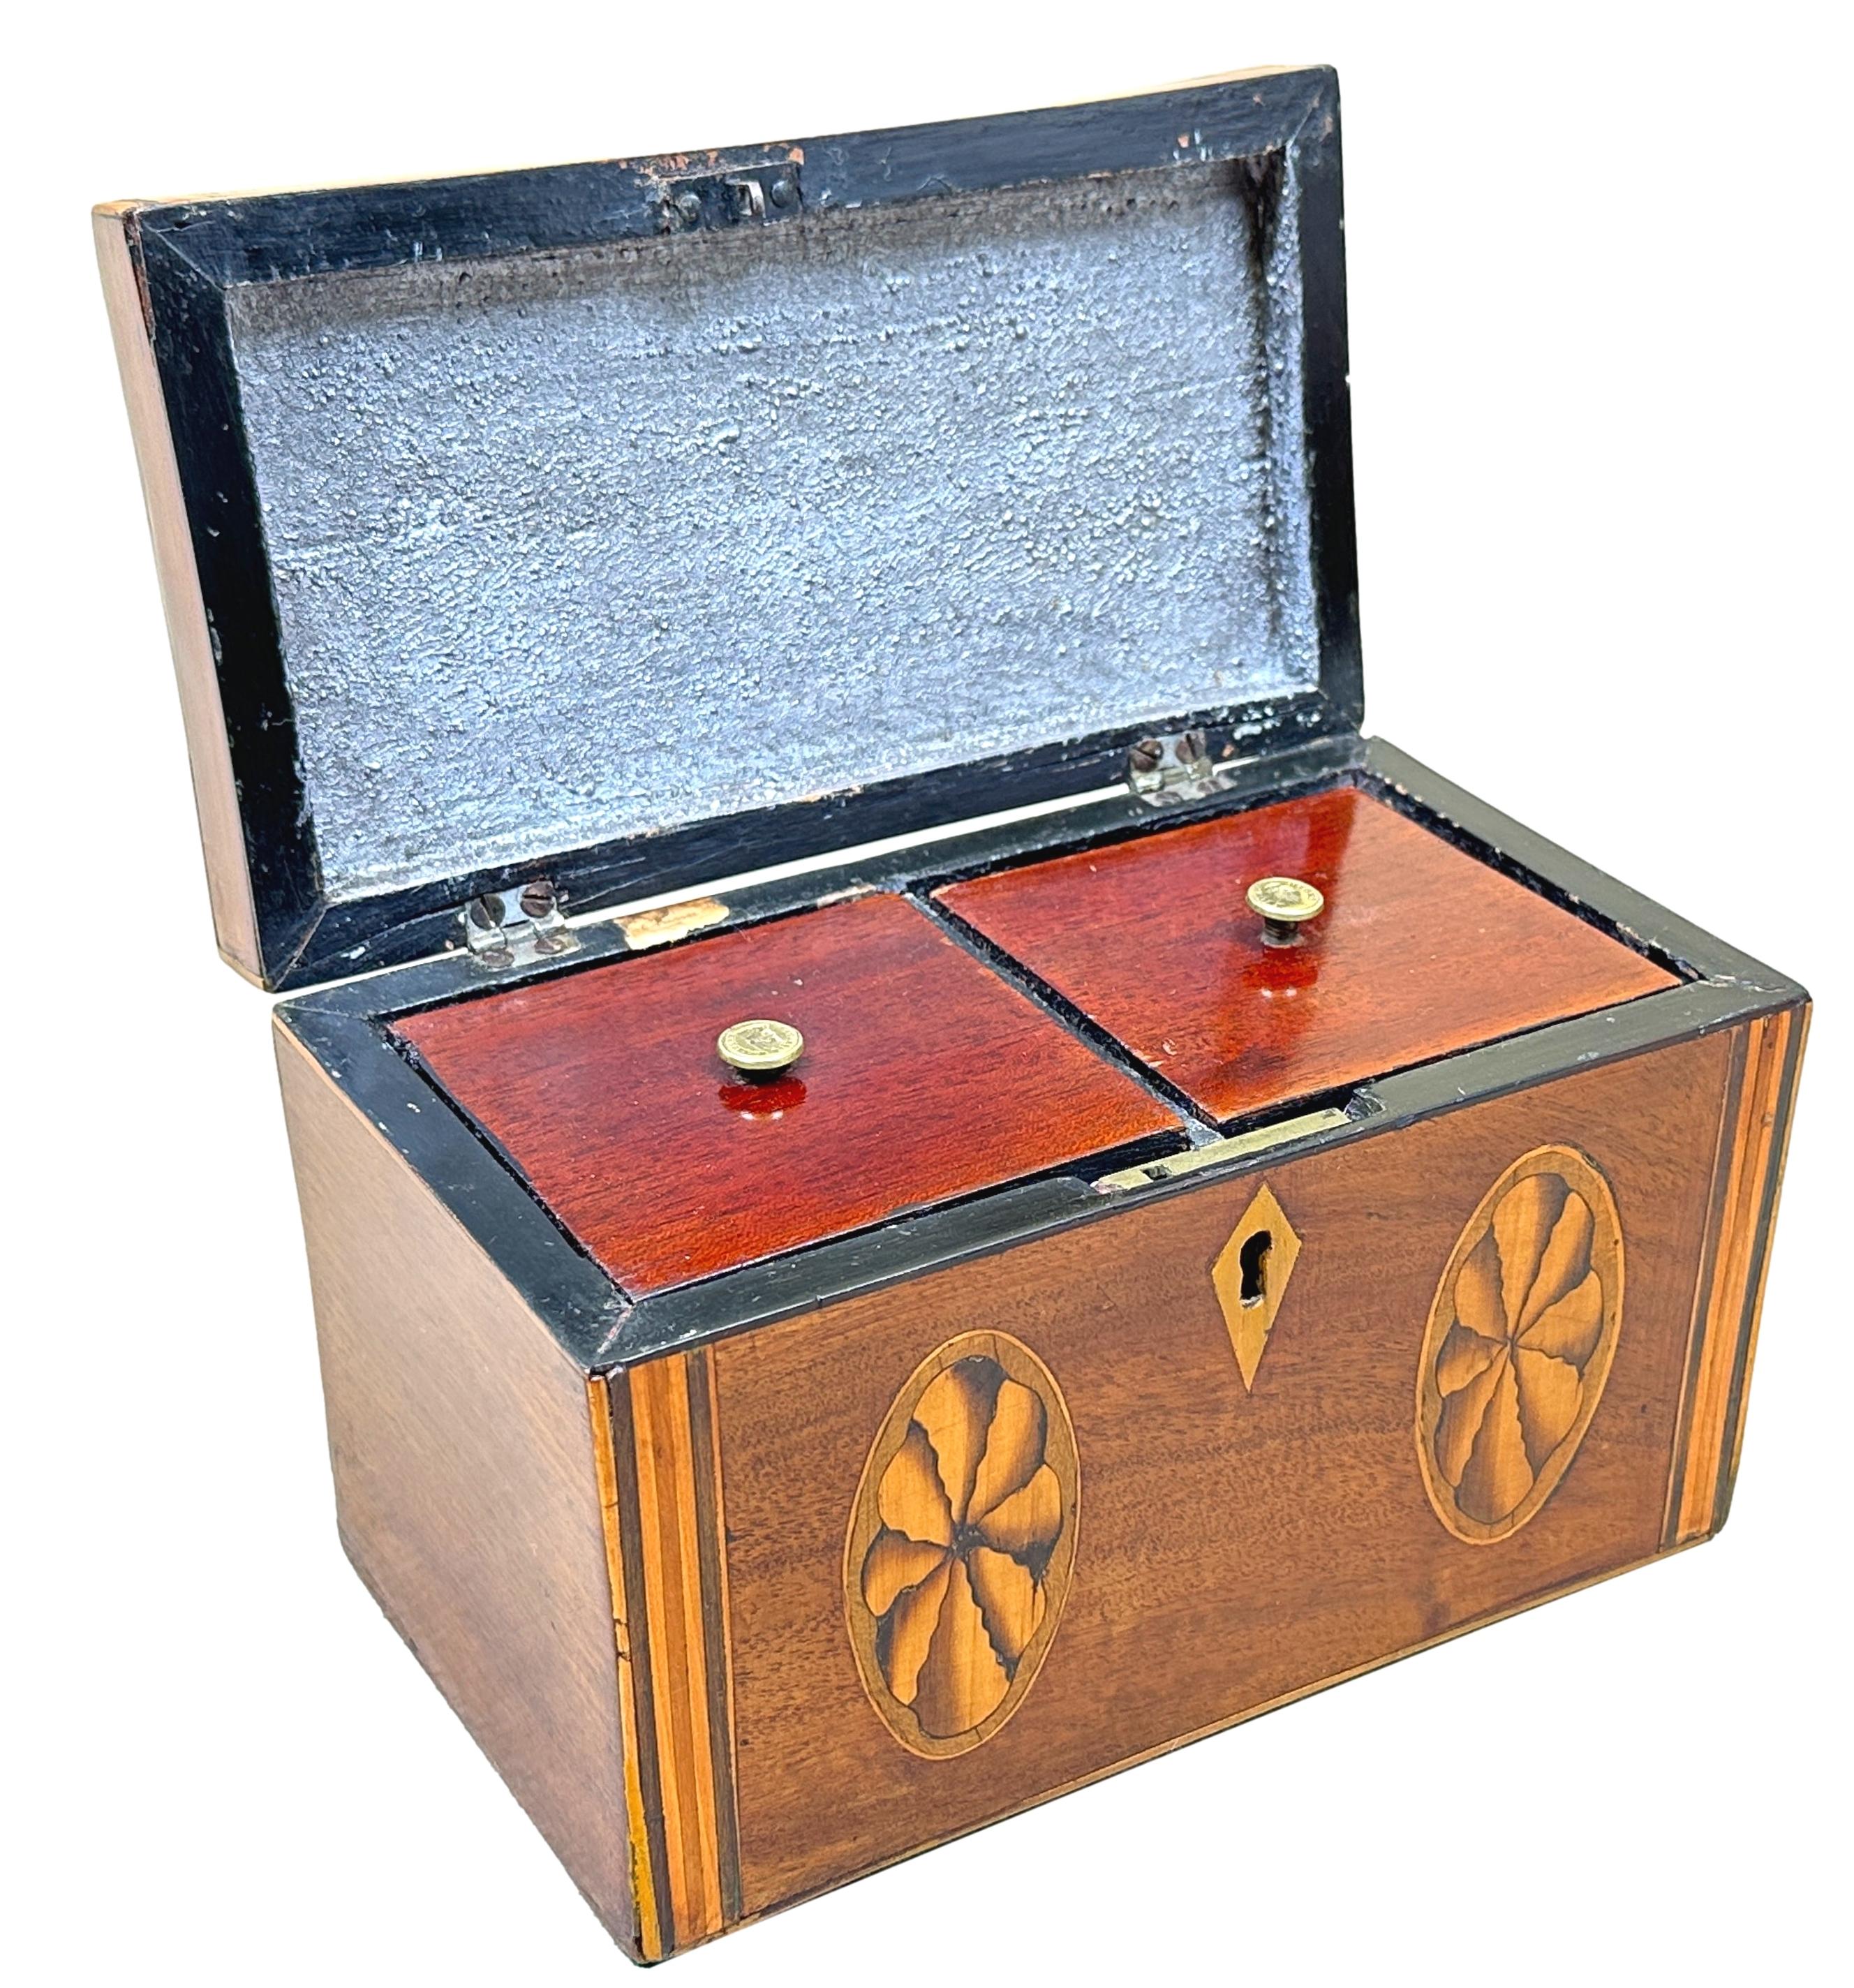 A very attractive and good quality late 18th century Georgian mahogany oblong tea caddy, retaining good colour and patina, having attractive inlaid decoration to front and hinged lid, enclosing double sectioned interior with lids.


Tea was a